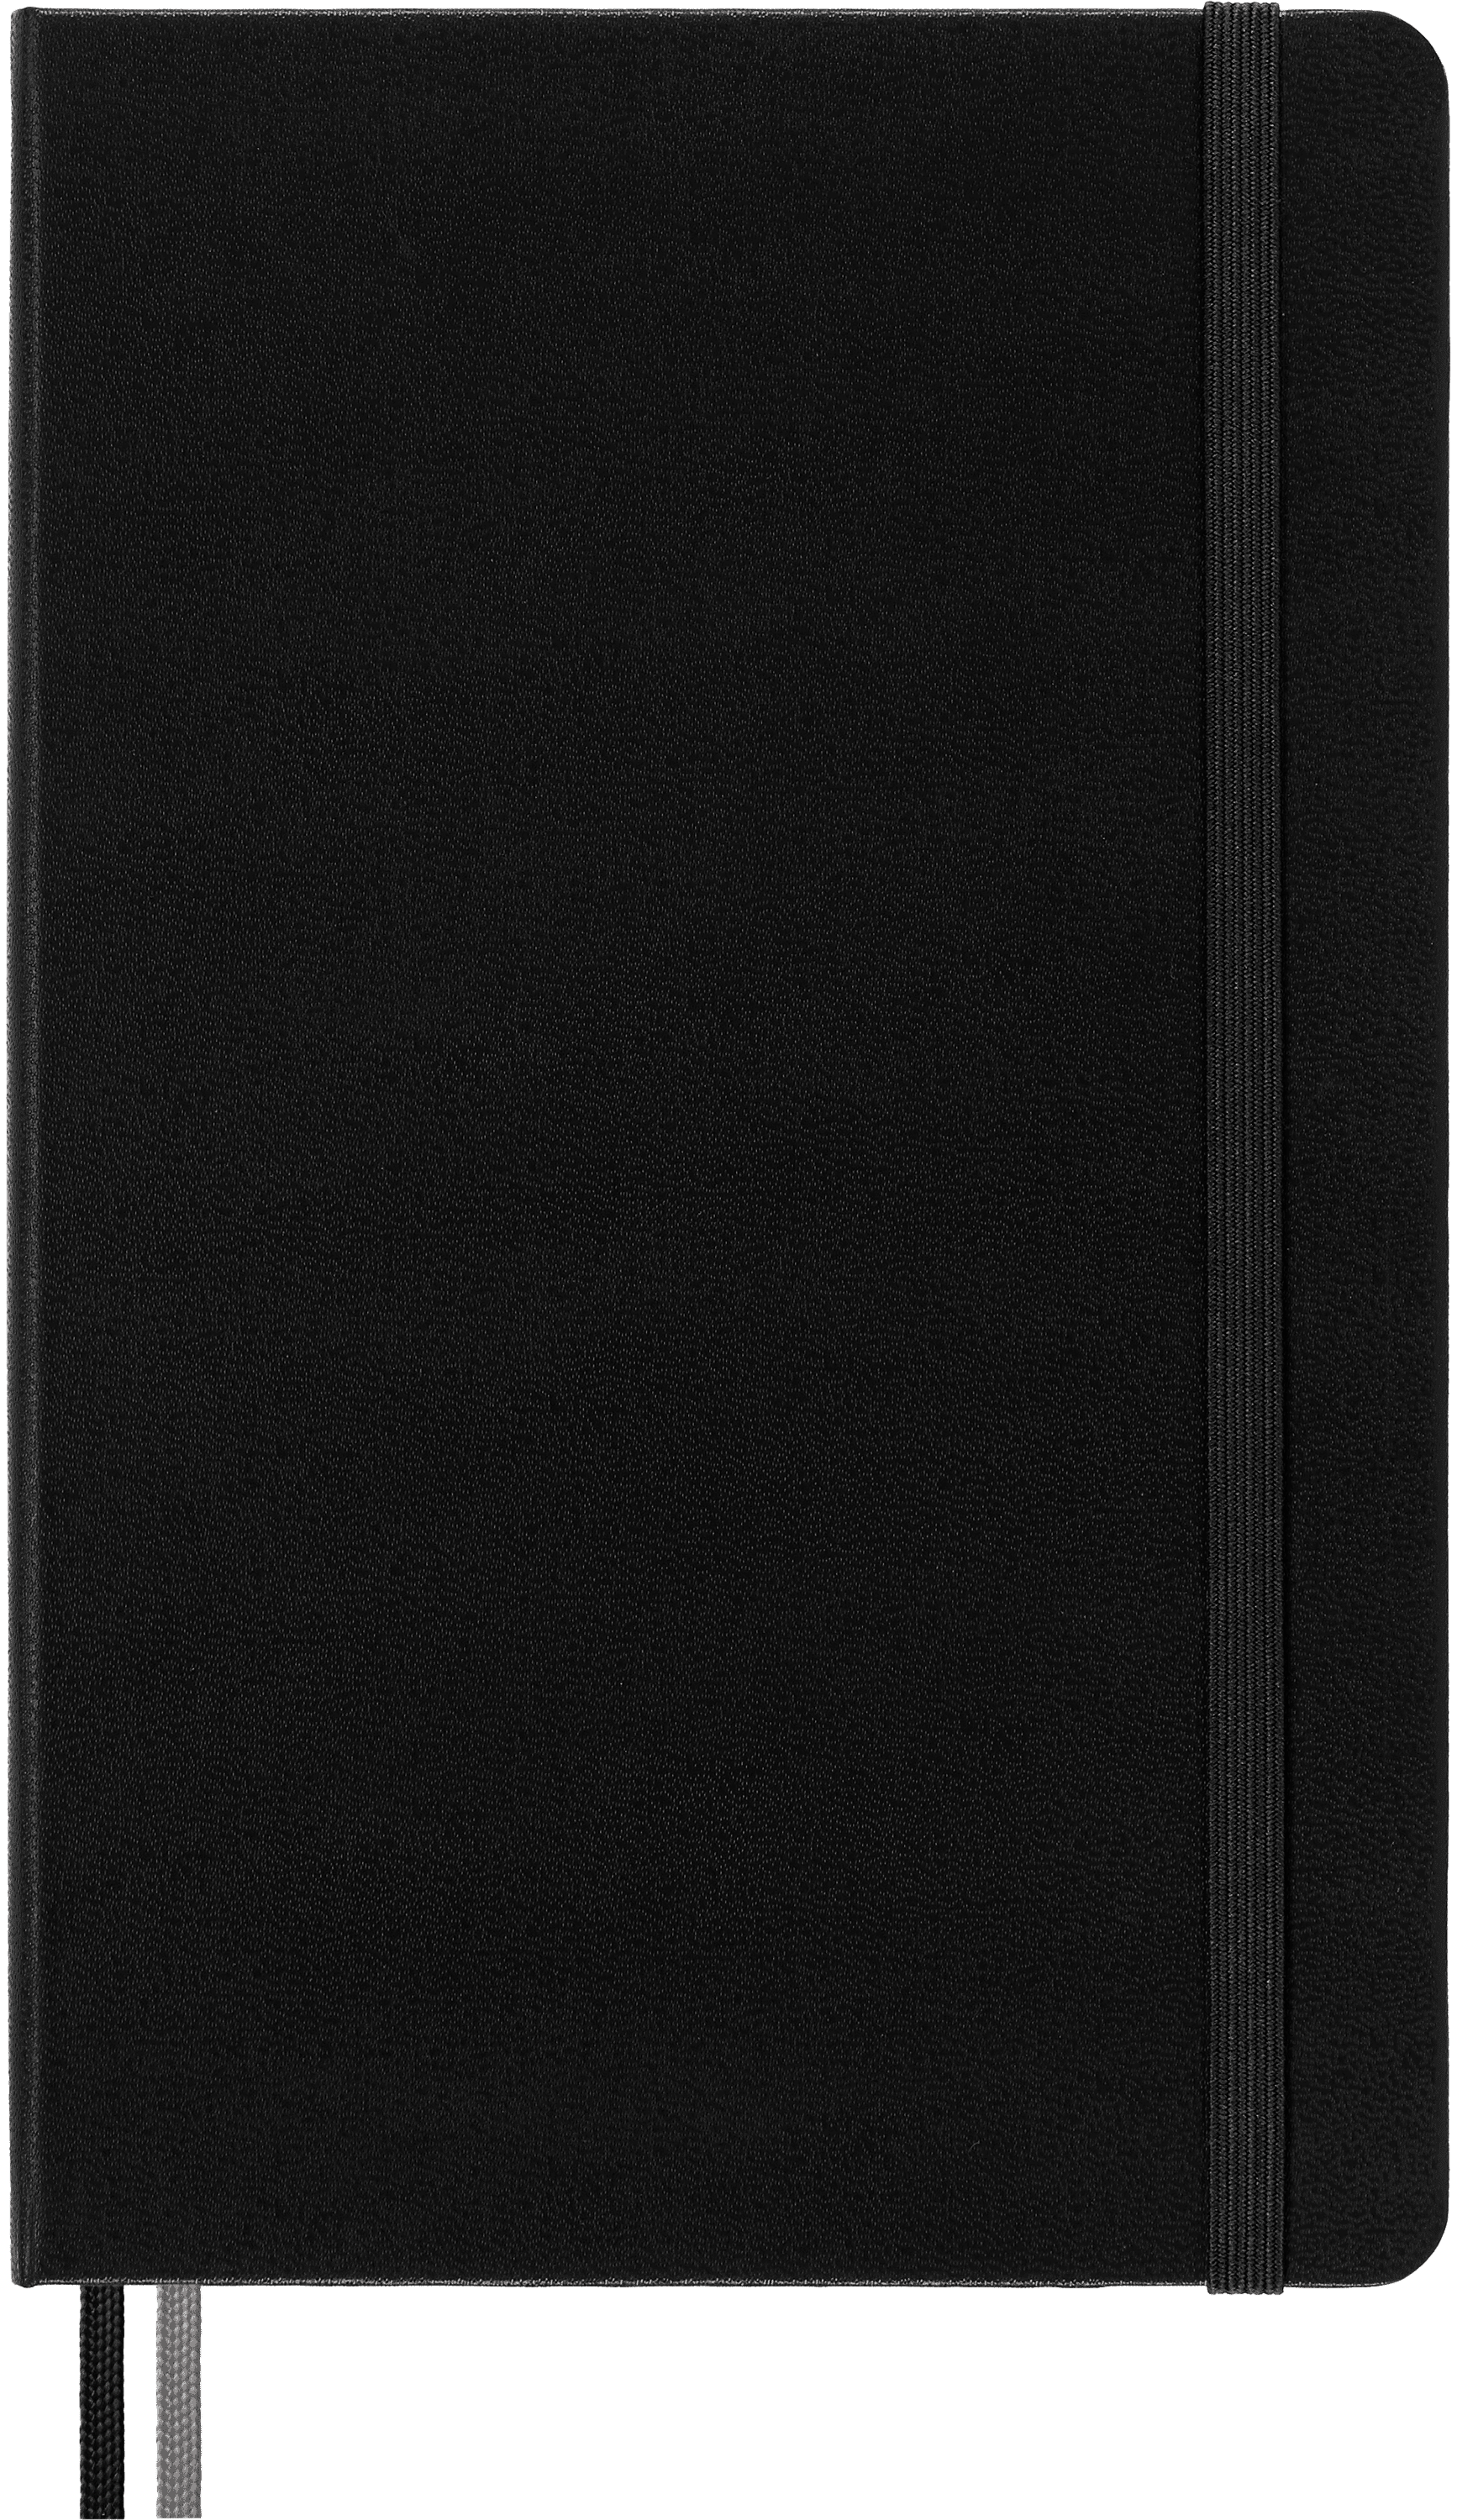 Squared/Grid Classic Expanded Notebook Hard Cover 5 x 8.25 Black 400 Pages Large